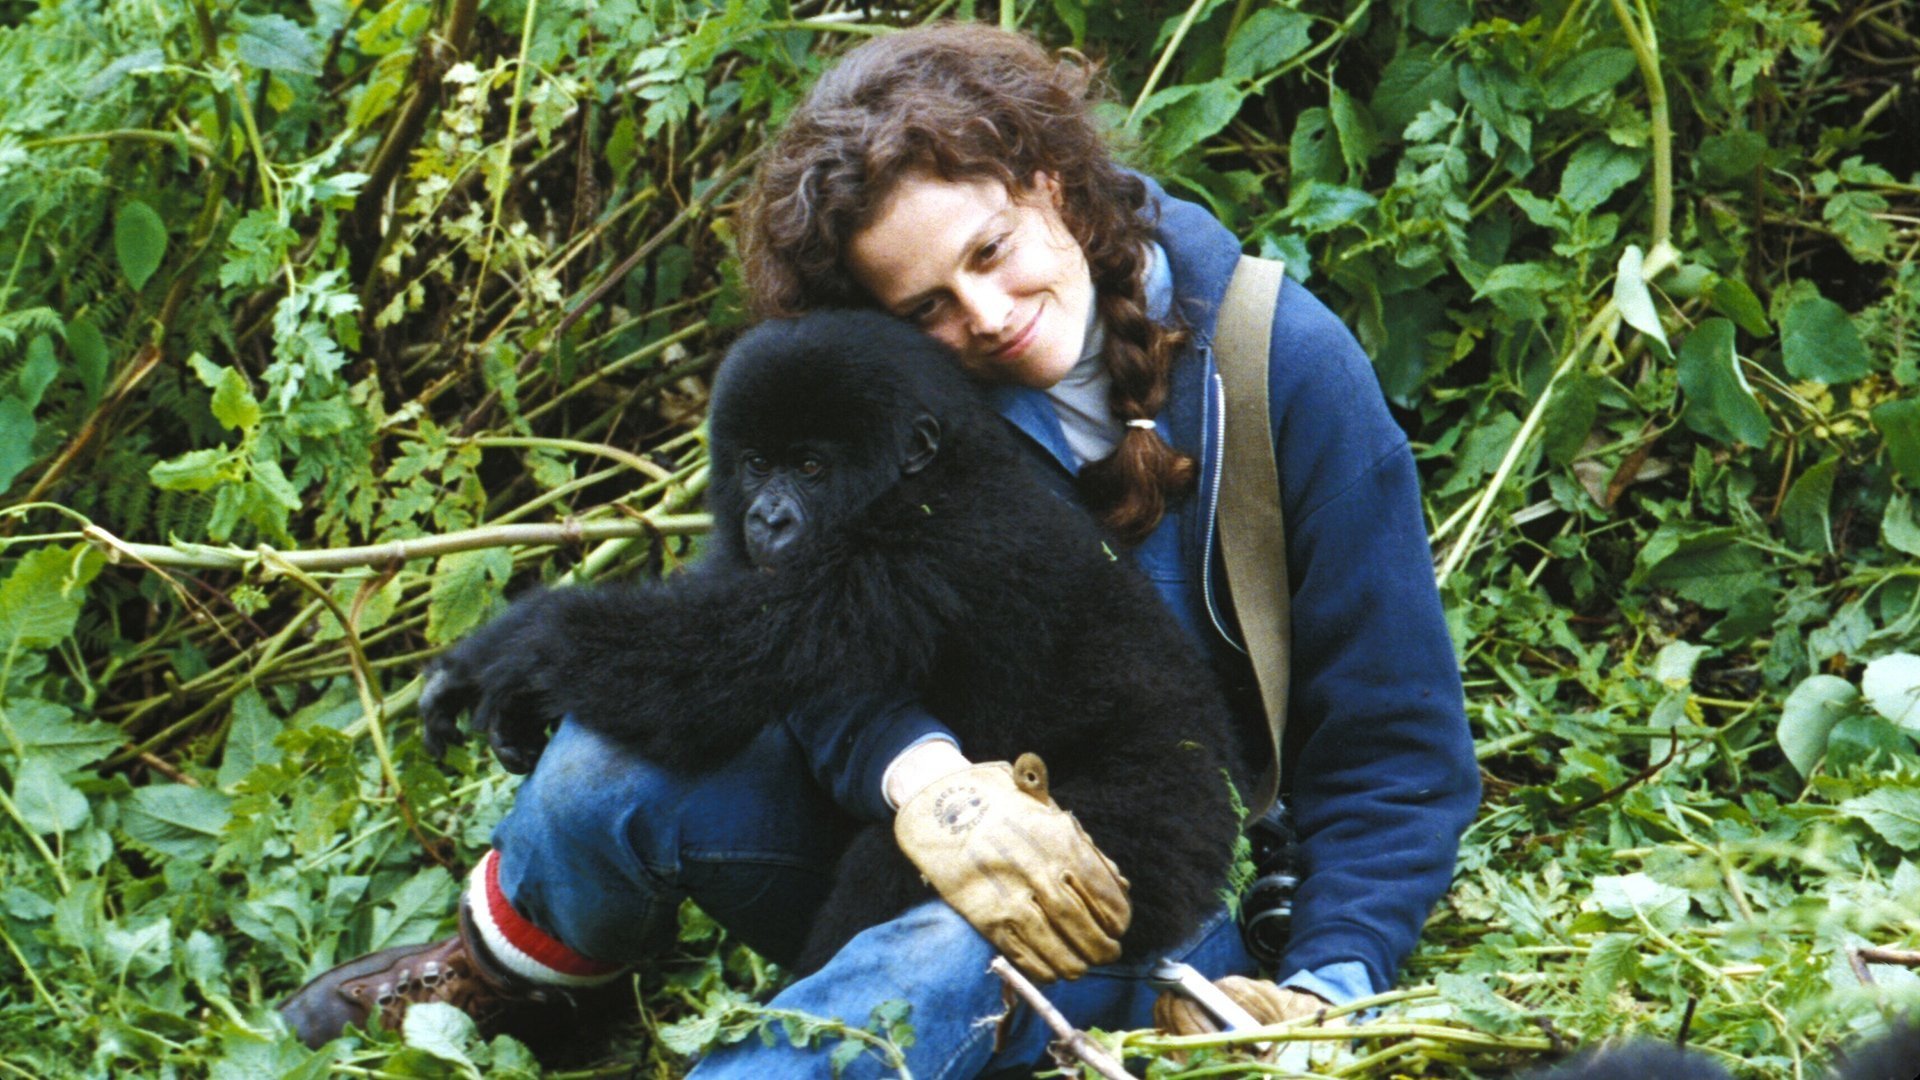 Gorillas in the Mist: The Story of Dian Fossey (1988) - Titlovi.com - Gorillas In The Mist The Story Of Dian Fossey